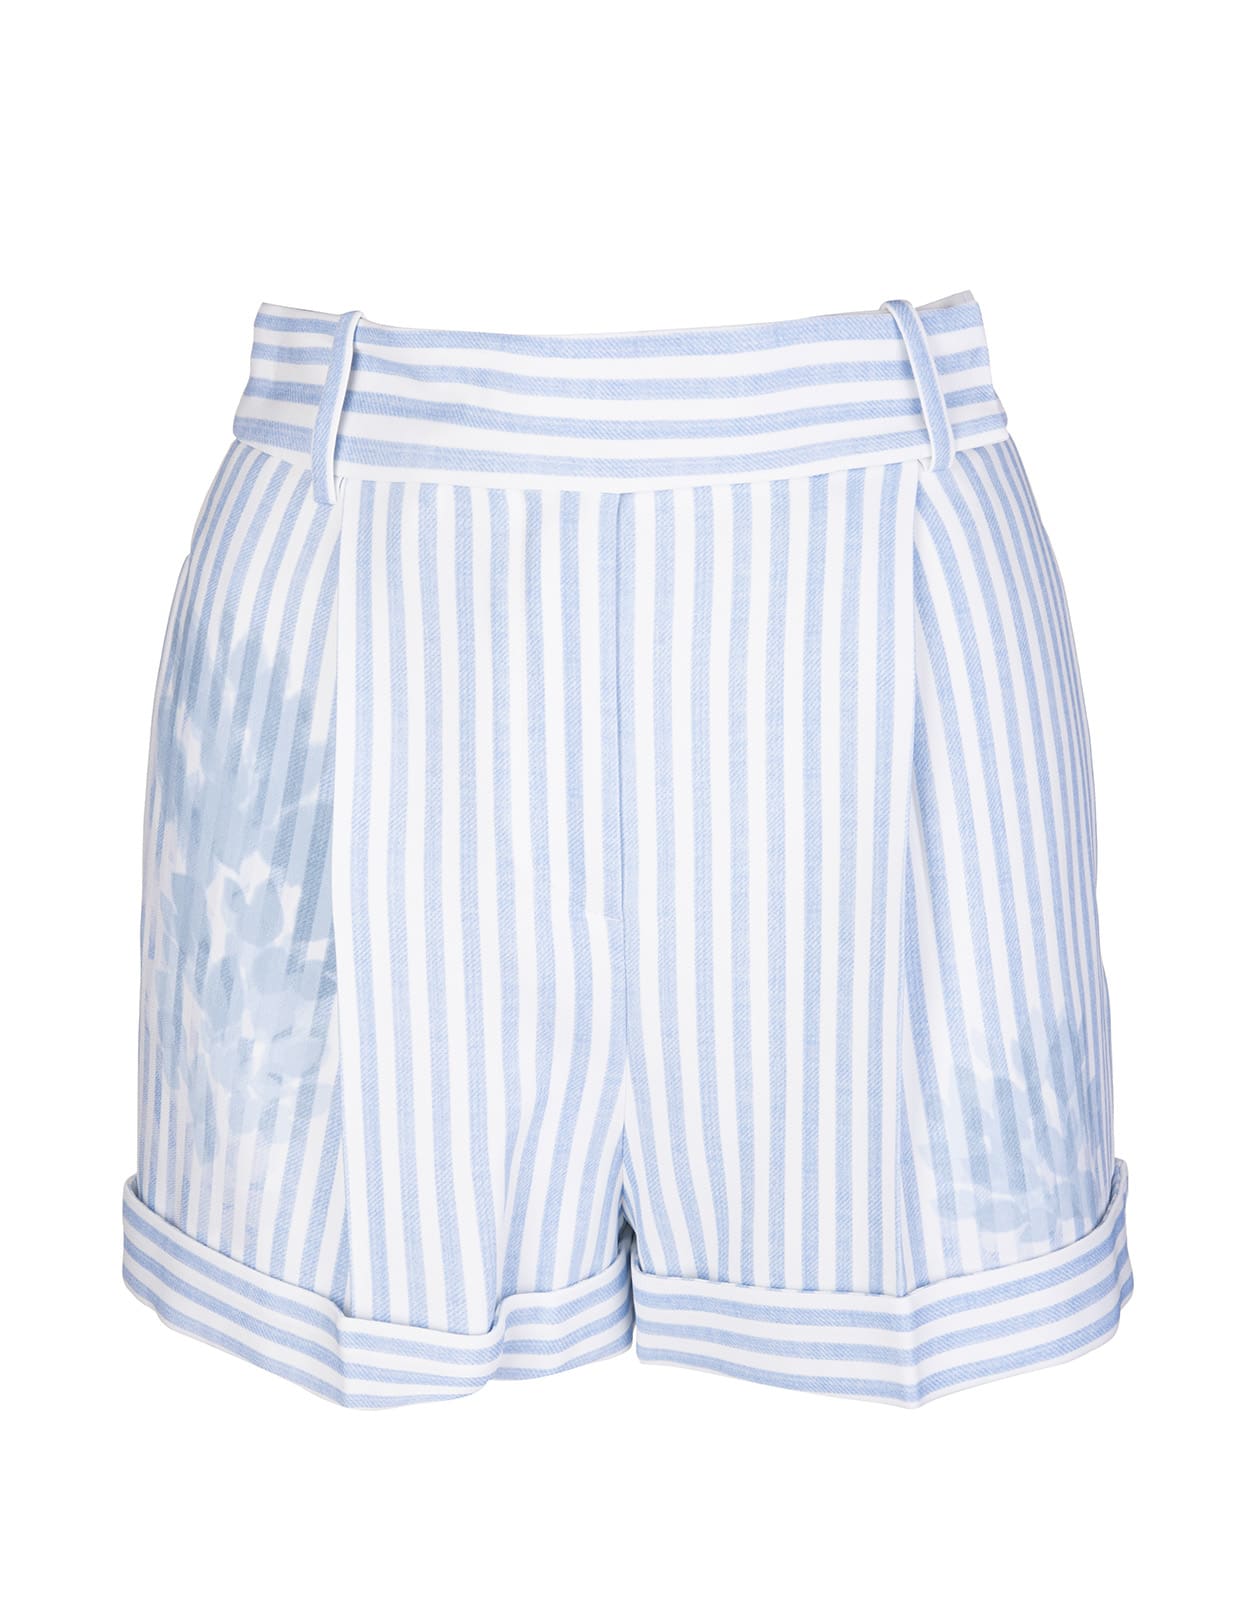 ERMANNO SCERVINO WOMAN WHITE AND LIGHT BLUE STRIPED SHORTS,D386P306PCXBE S3808